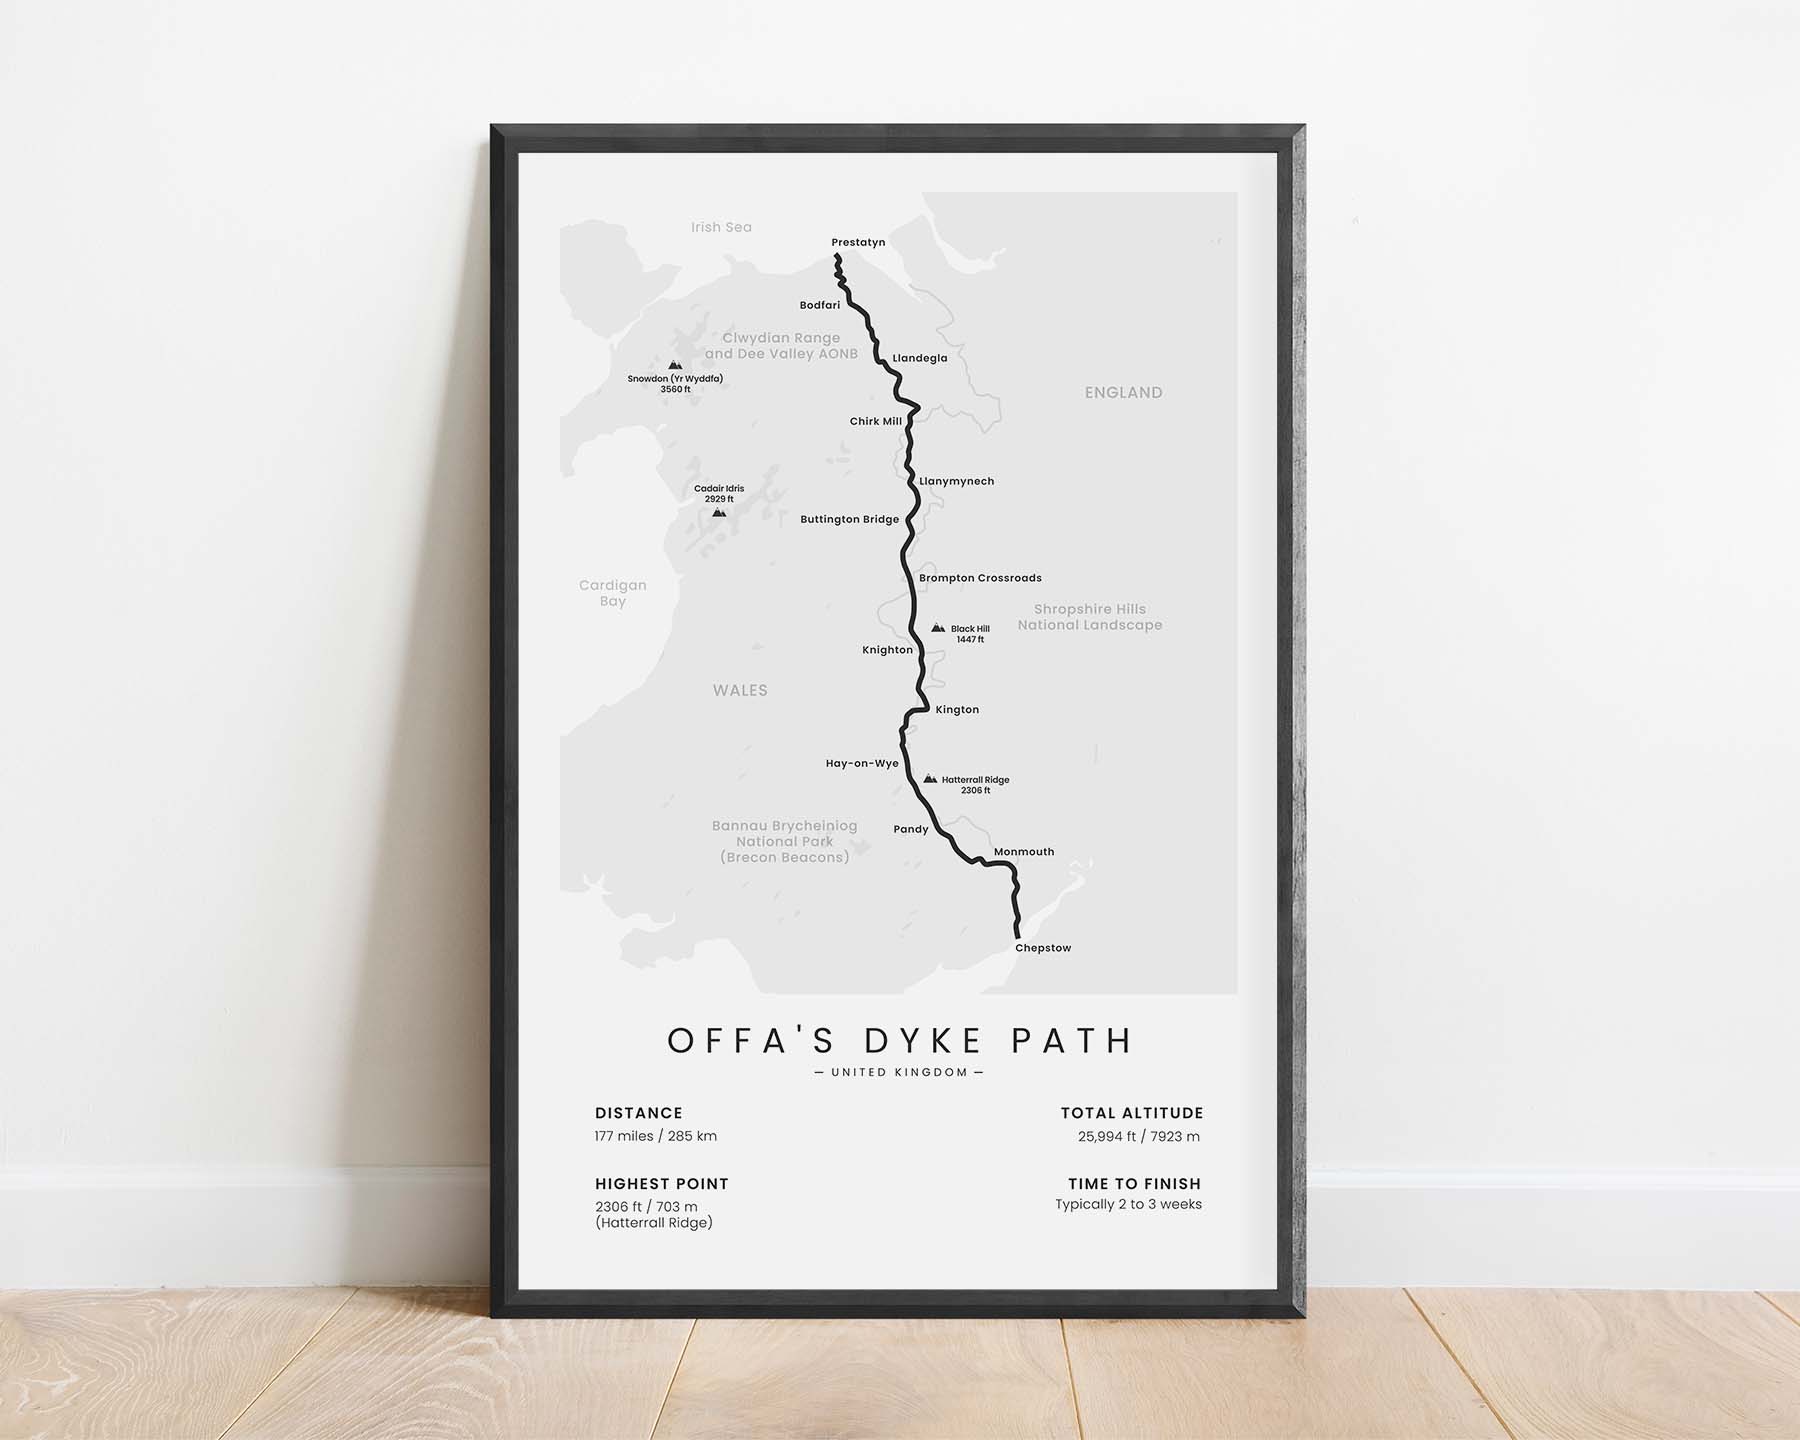 Offa's Dyke Path (Offa's Dyke) Trek Poster with White Background in Minimal Room Decor